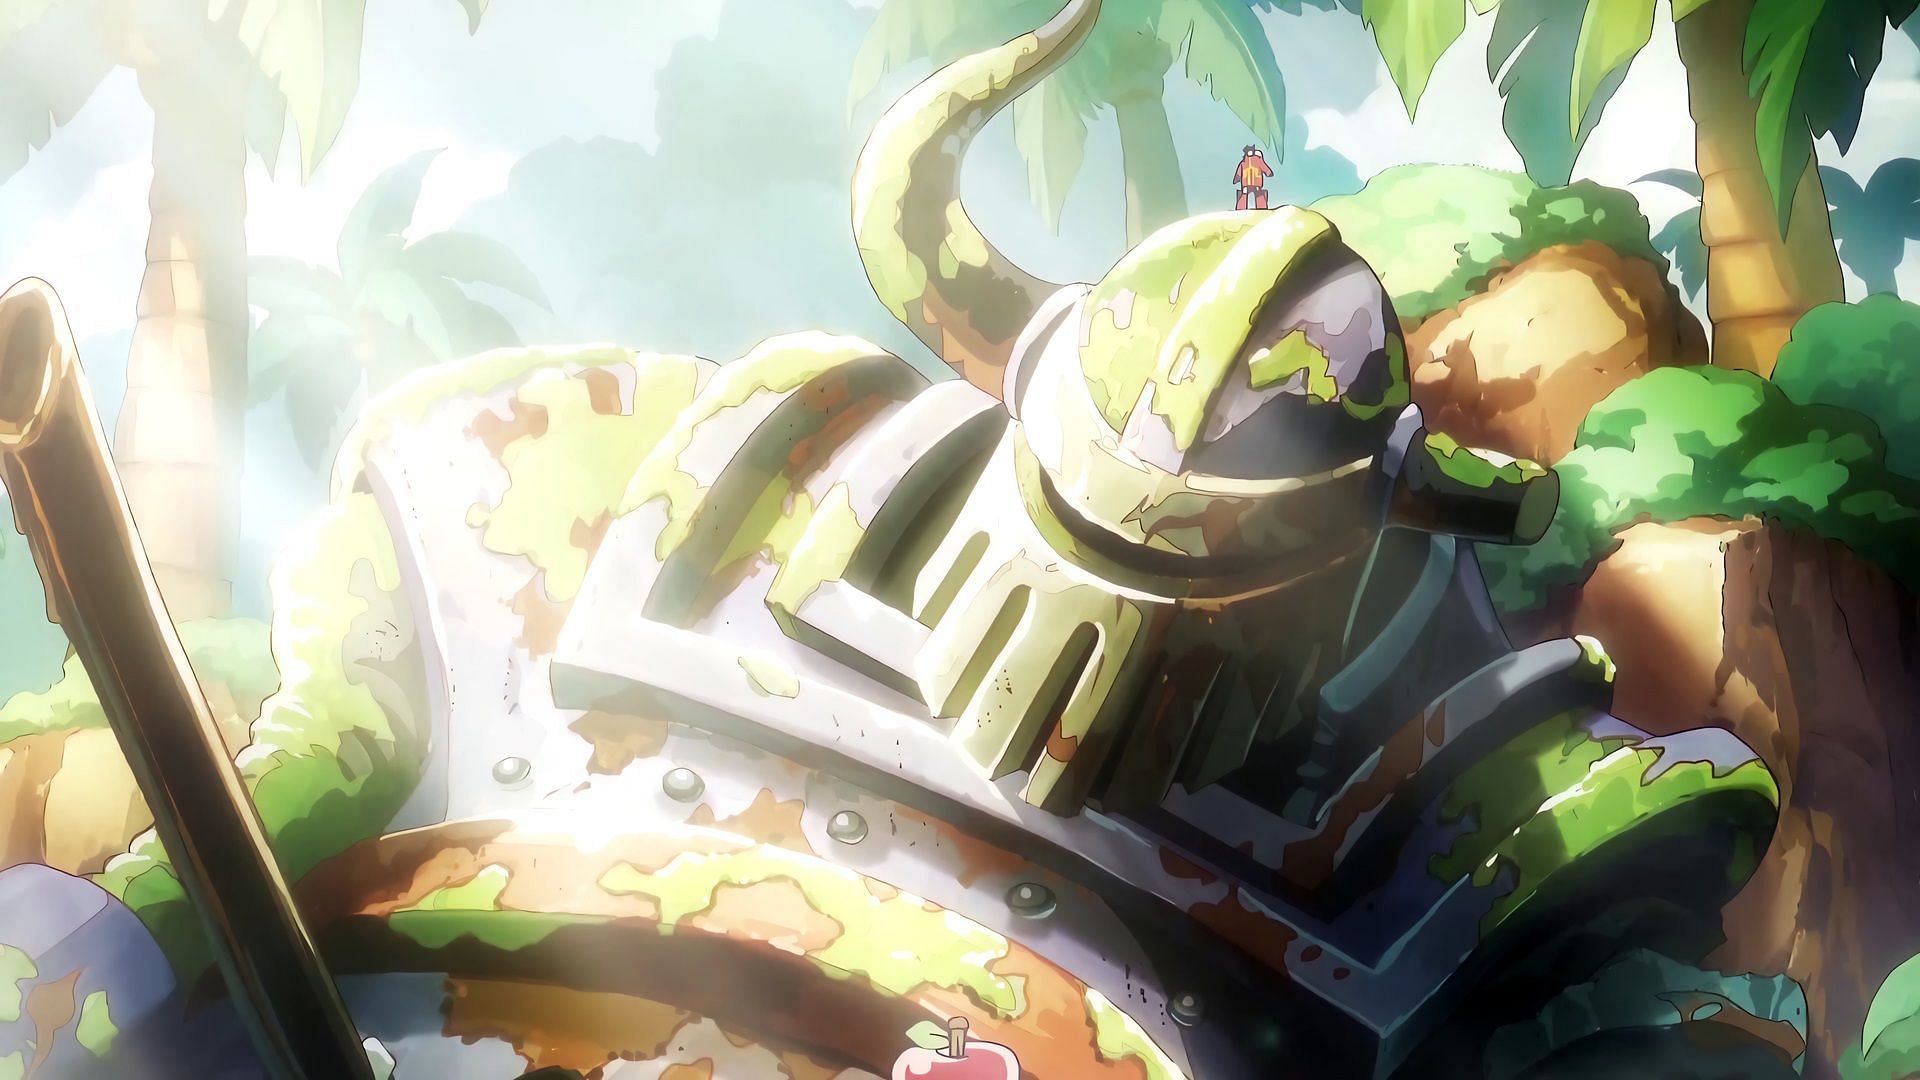 The dormant Iron Giant as seen in the One Piece anime (Image via Toei Animation)